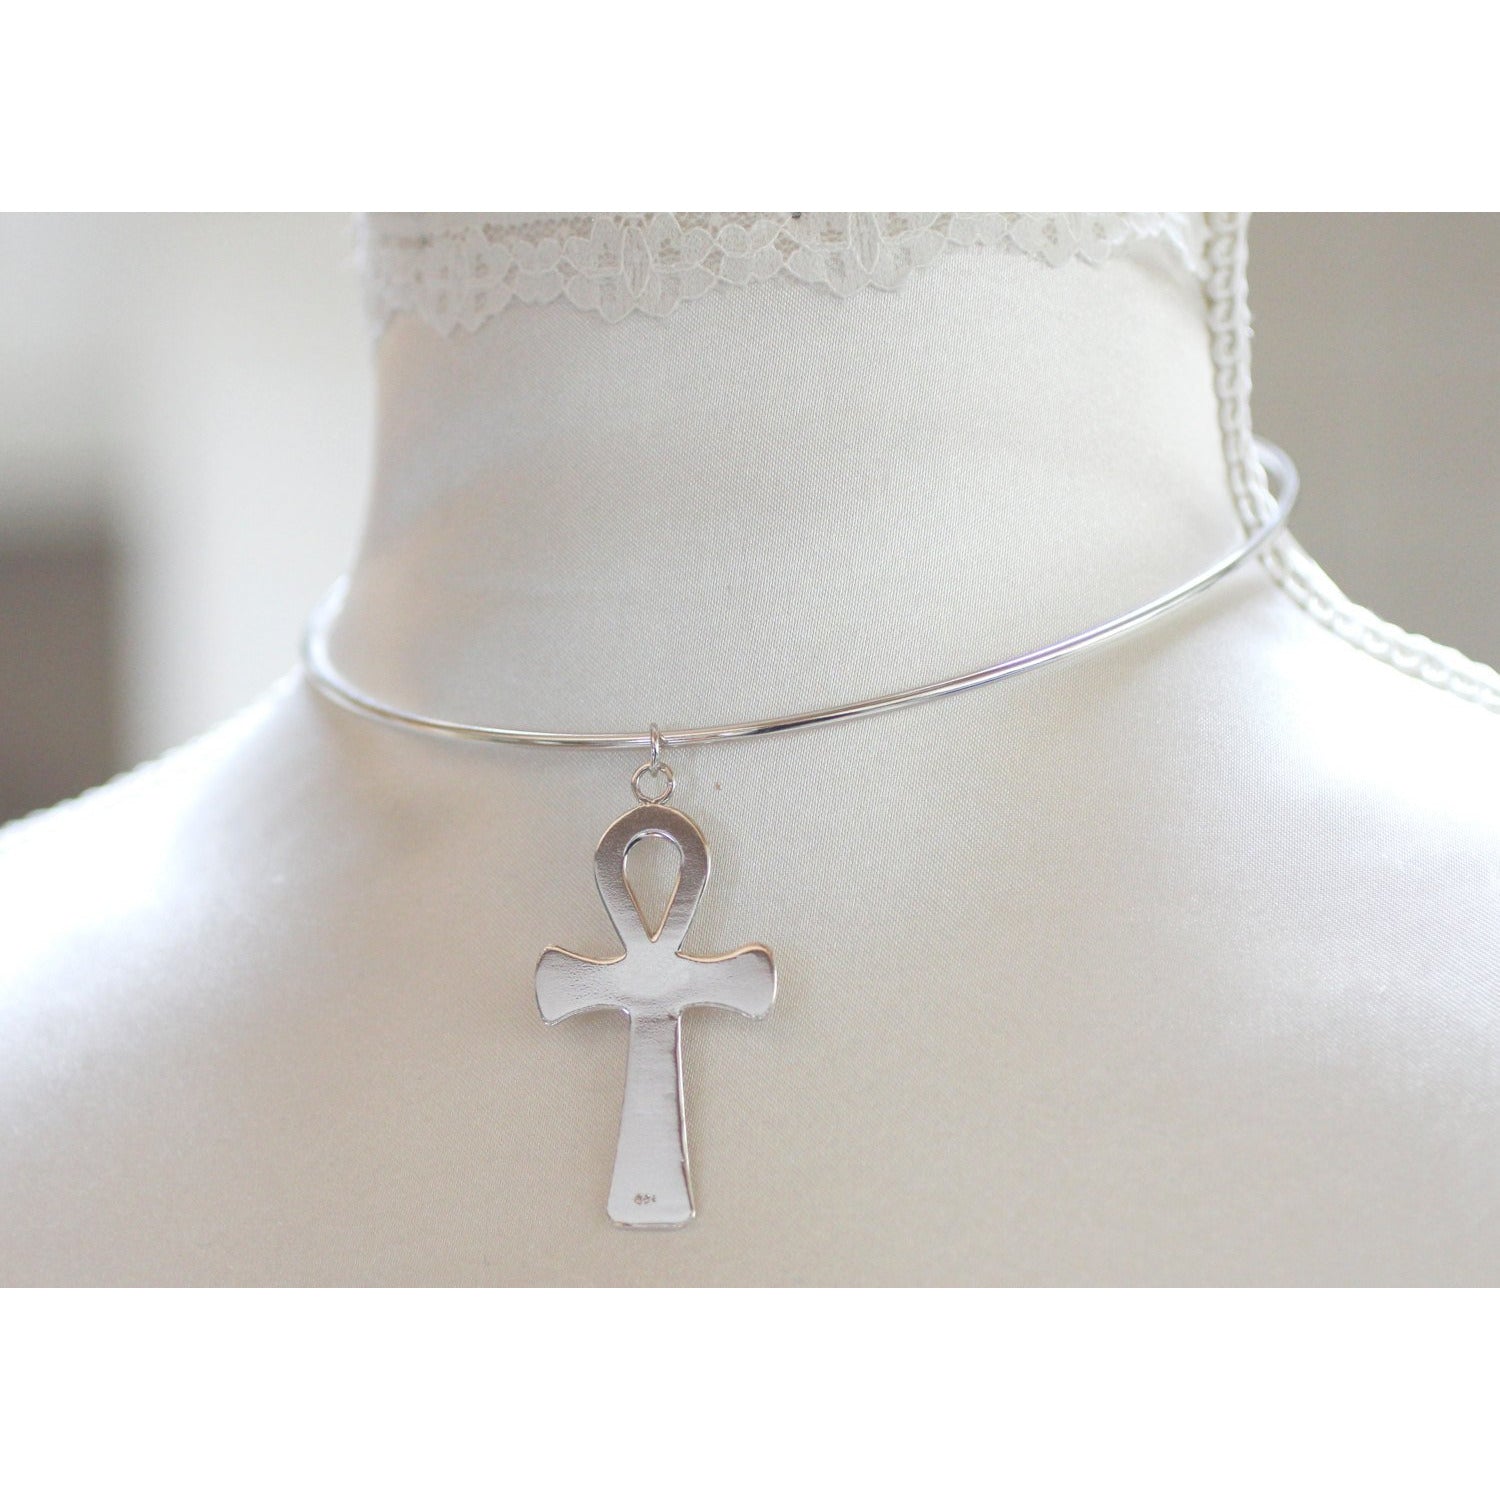 STERLING SILVER DISCREET COLLAR AND LARGE ANKH PENDANT.